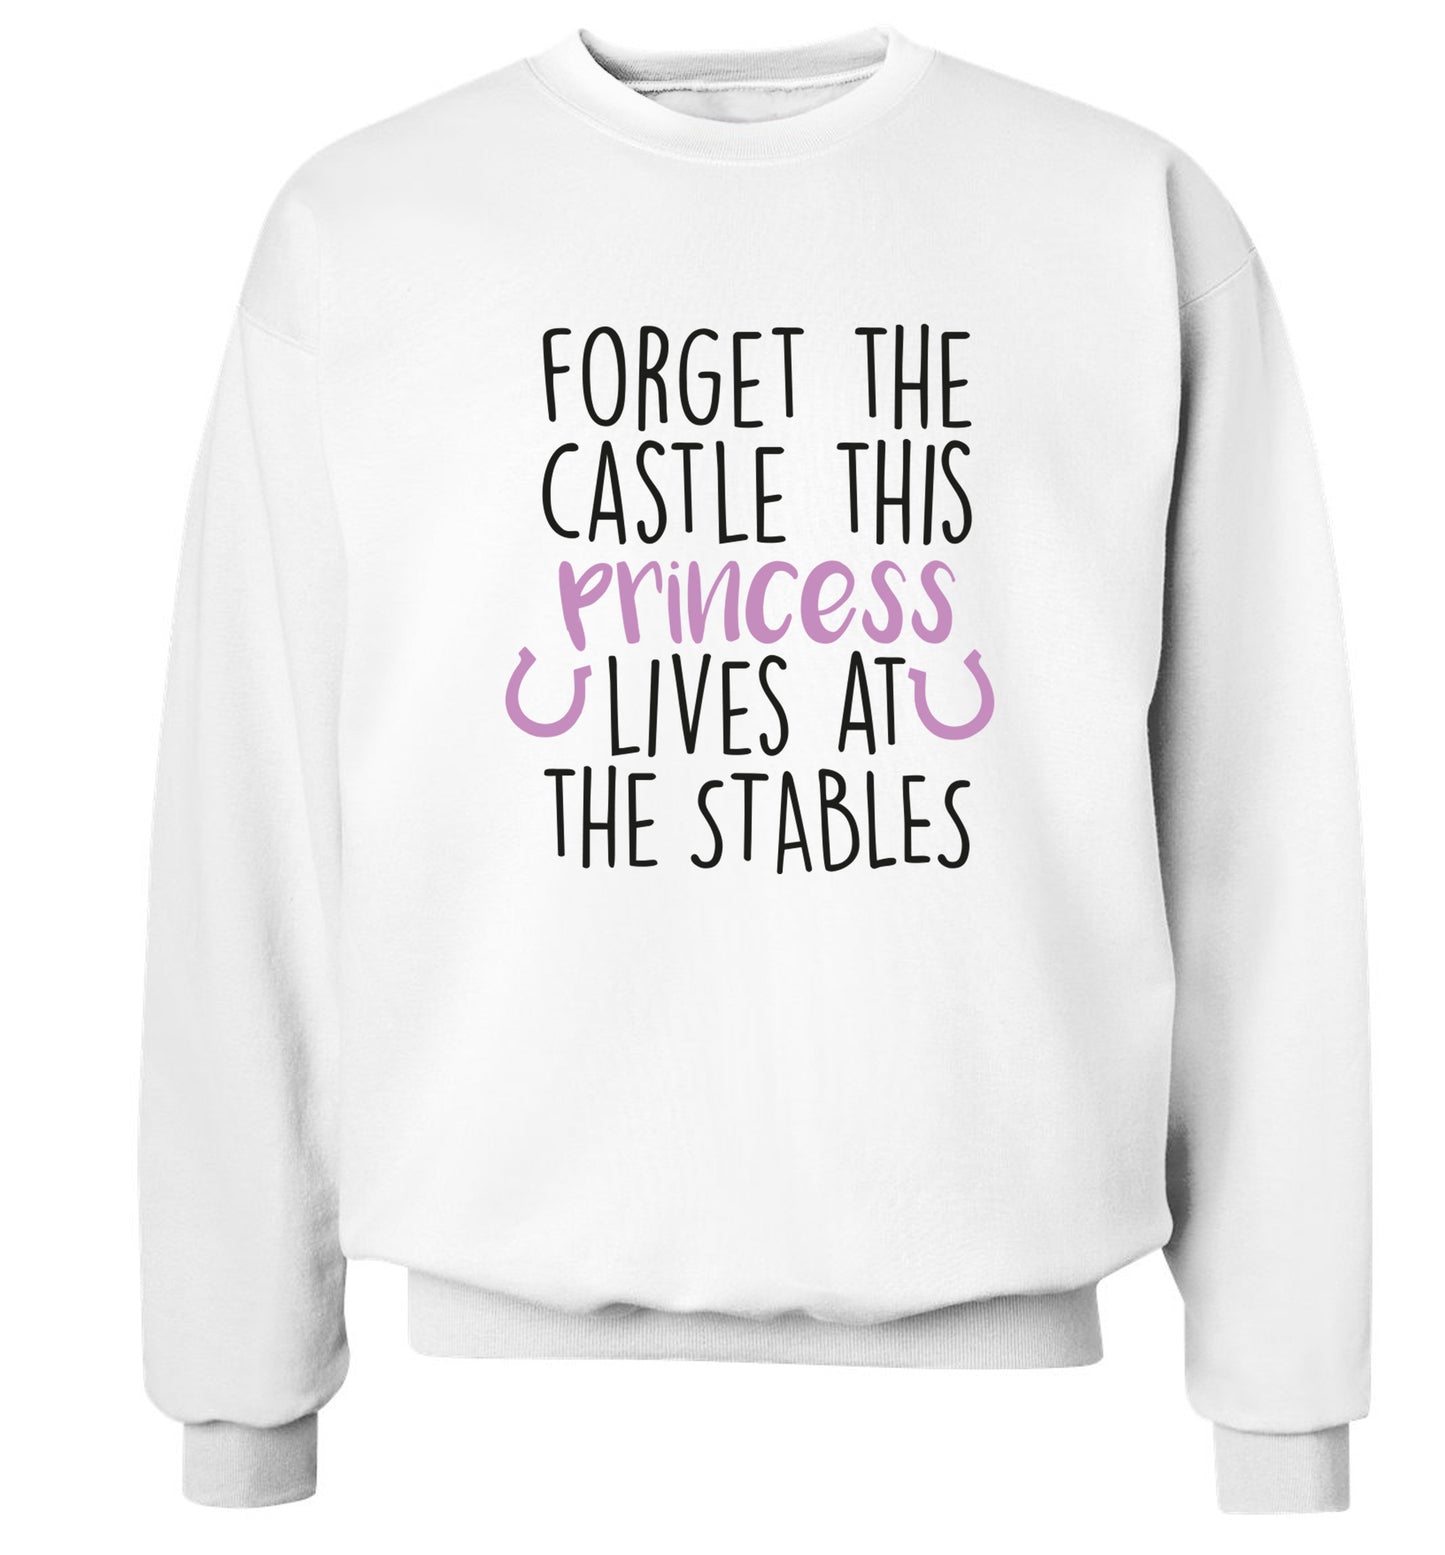 Forget the castle this princess lives at the stables Adult's unisex white Sweater 2XL